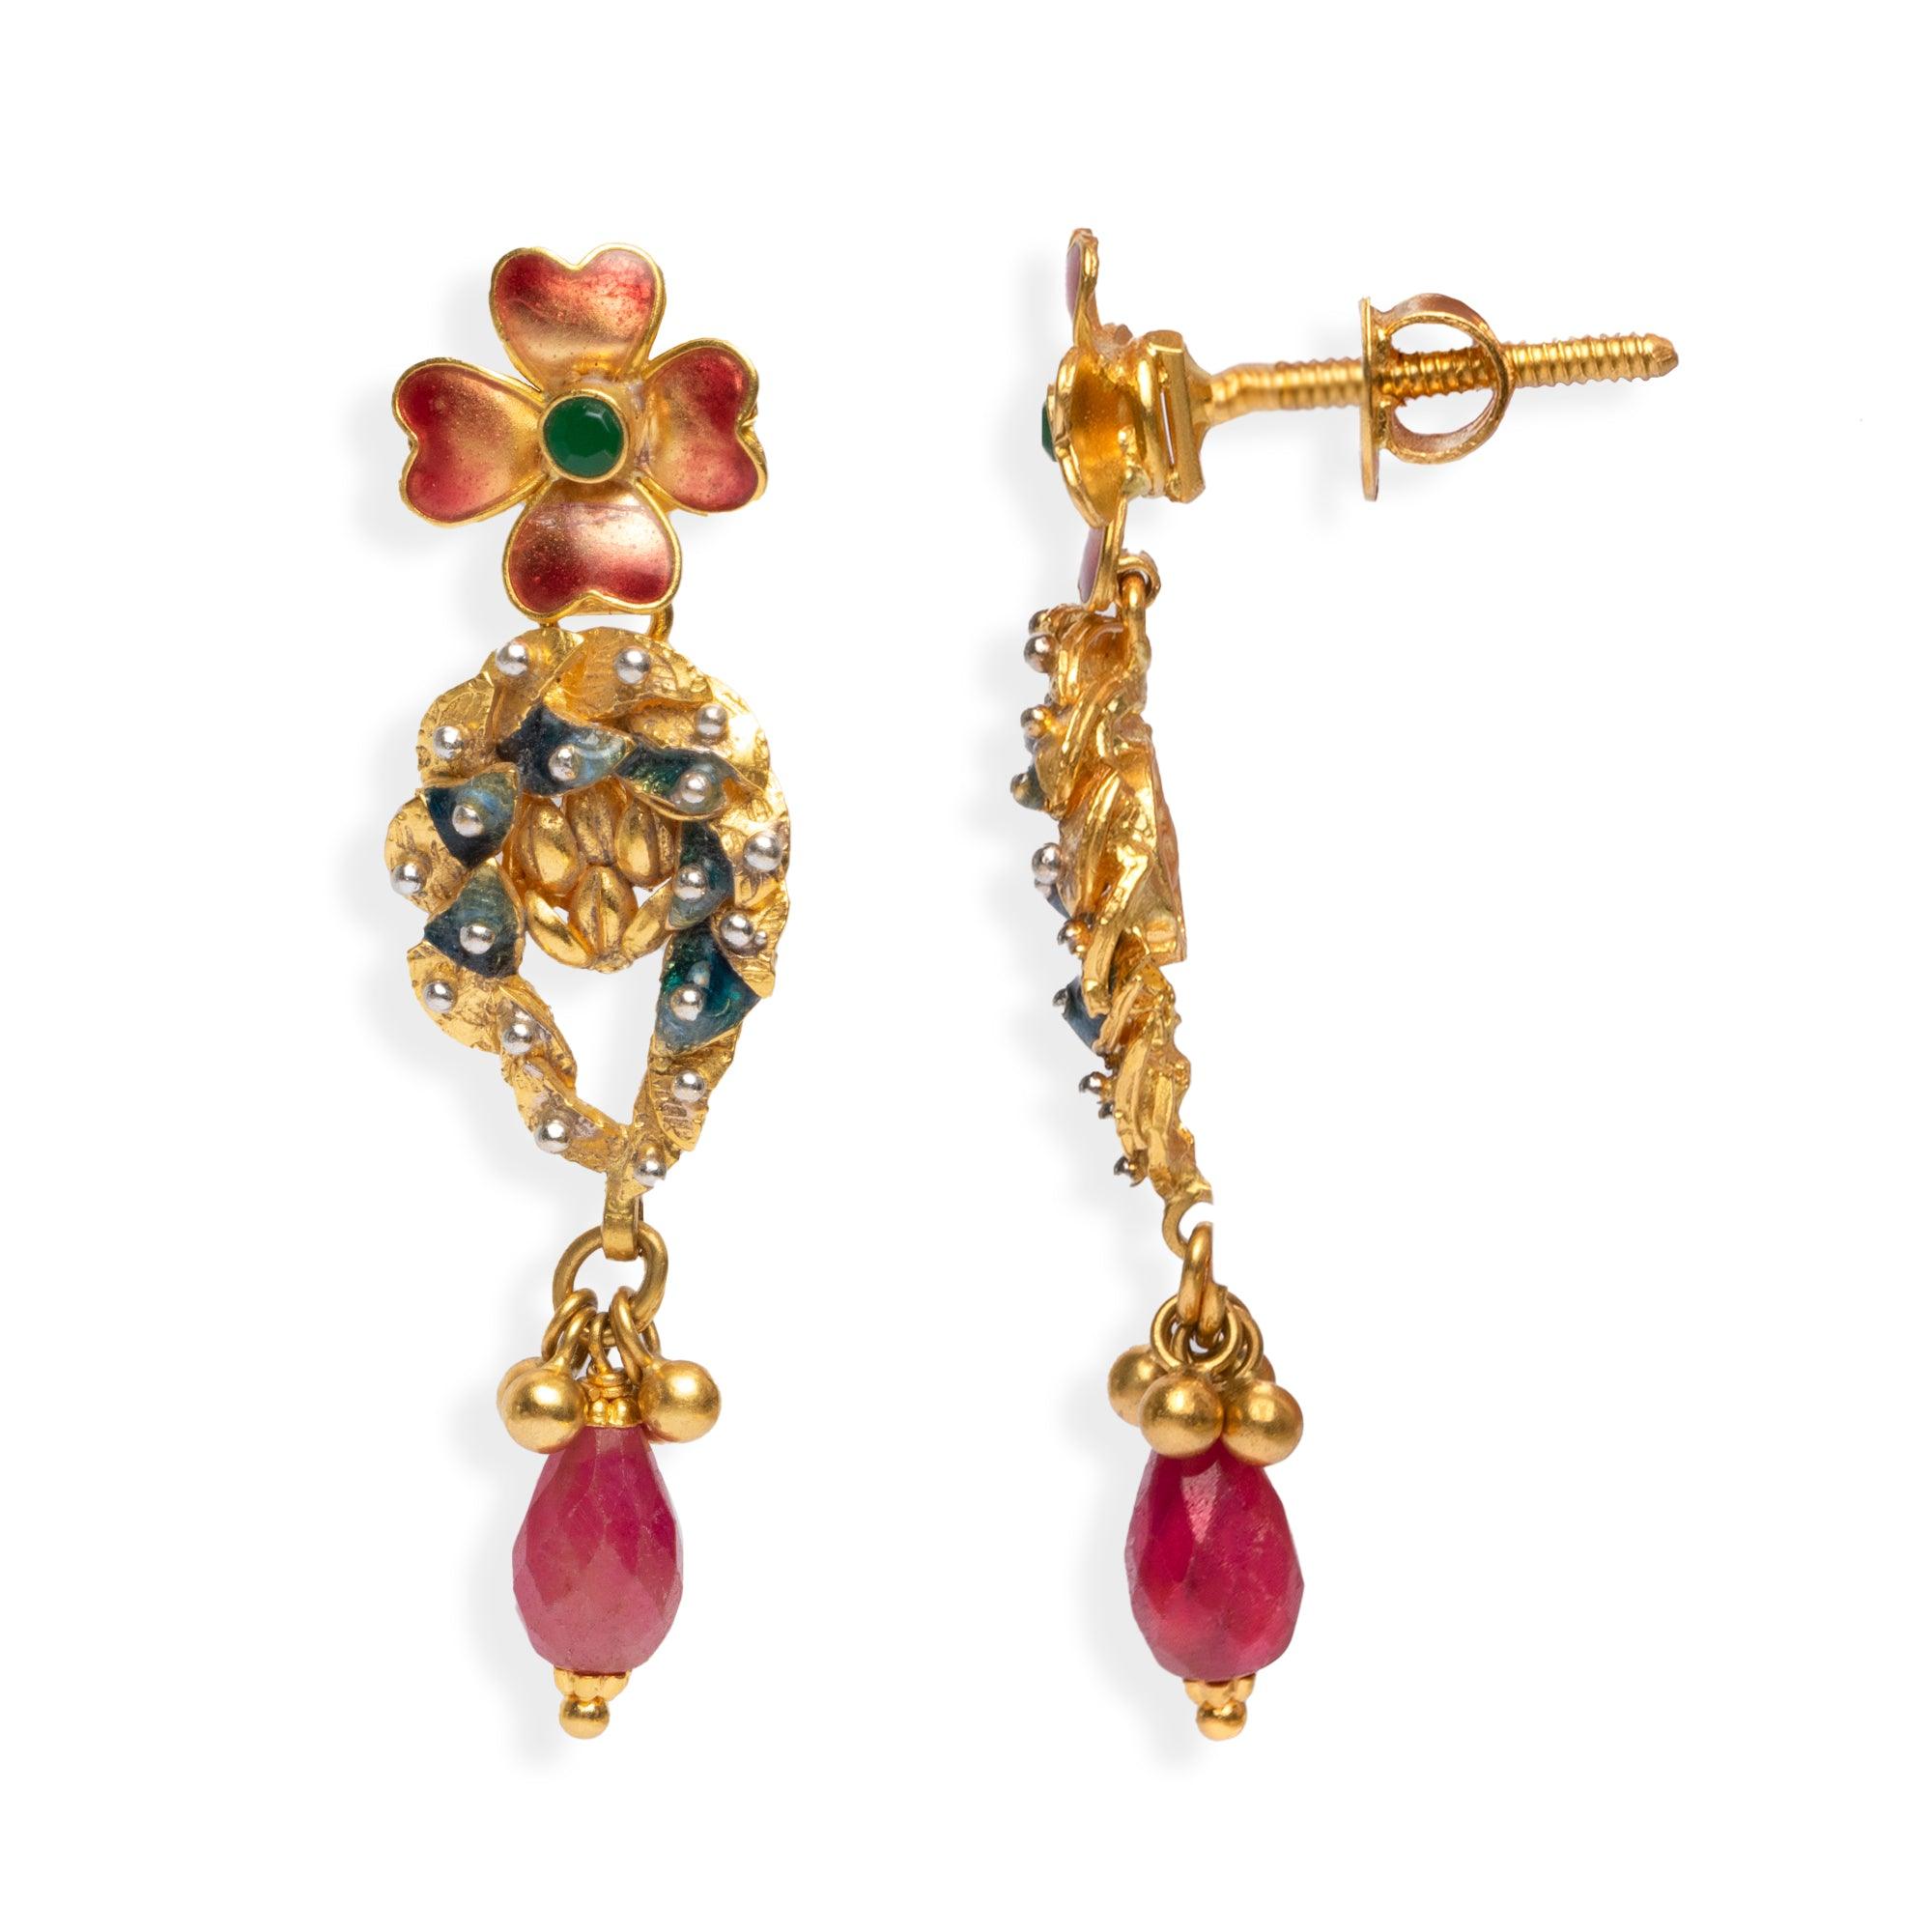 22ct Gold Enamel and Cubic Zirconia Drop Earrings with Flower Design (10.4g) E-3350 - Minar Jewellers